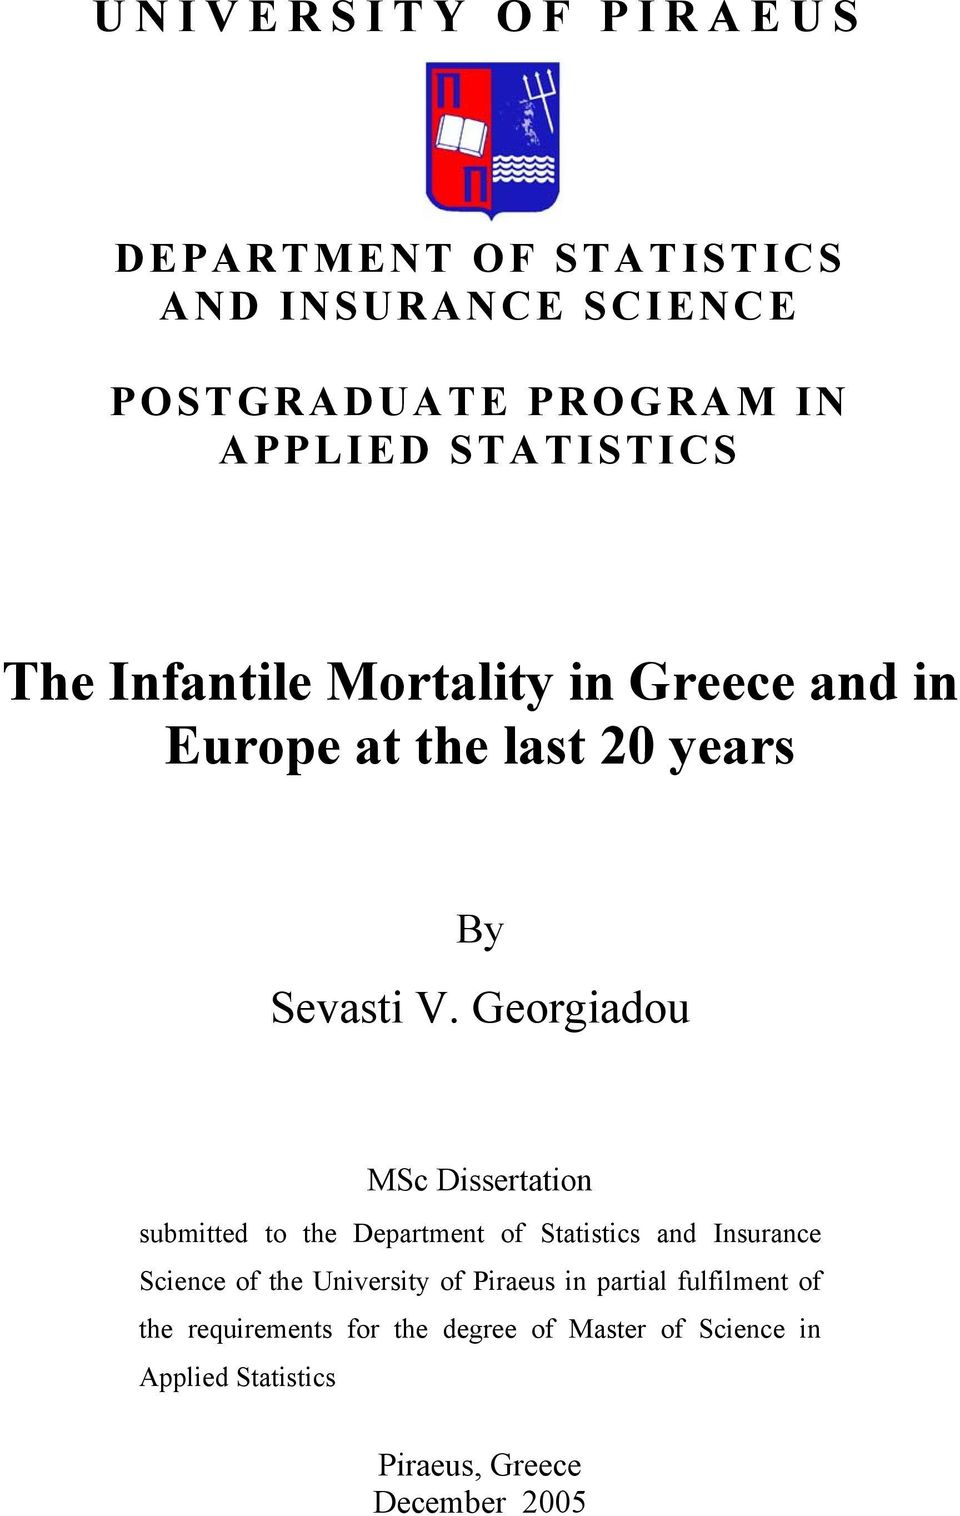 Georgiadou MSc Dissertation submitted to the Department of Statistics and Insurance Science of the University